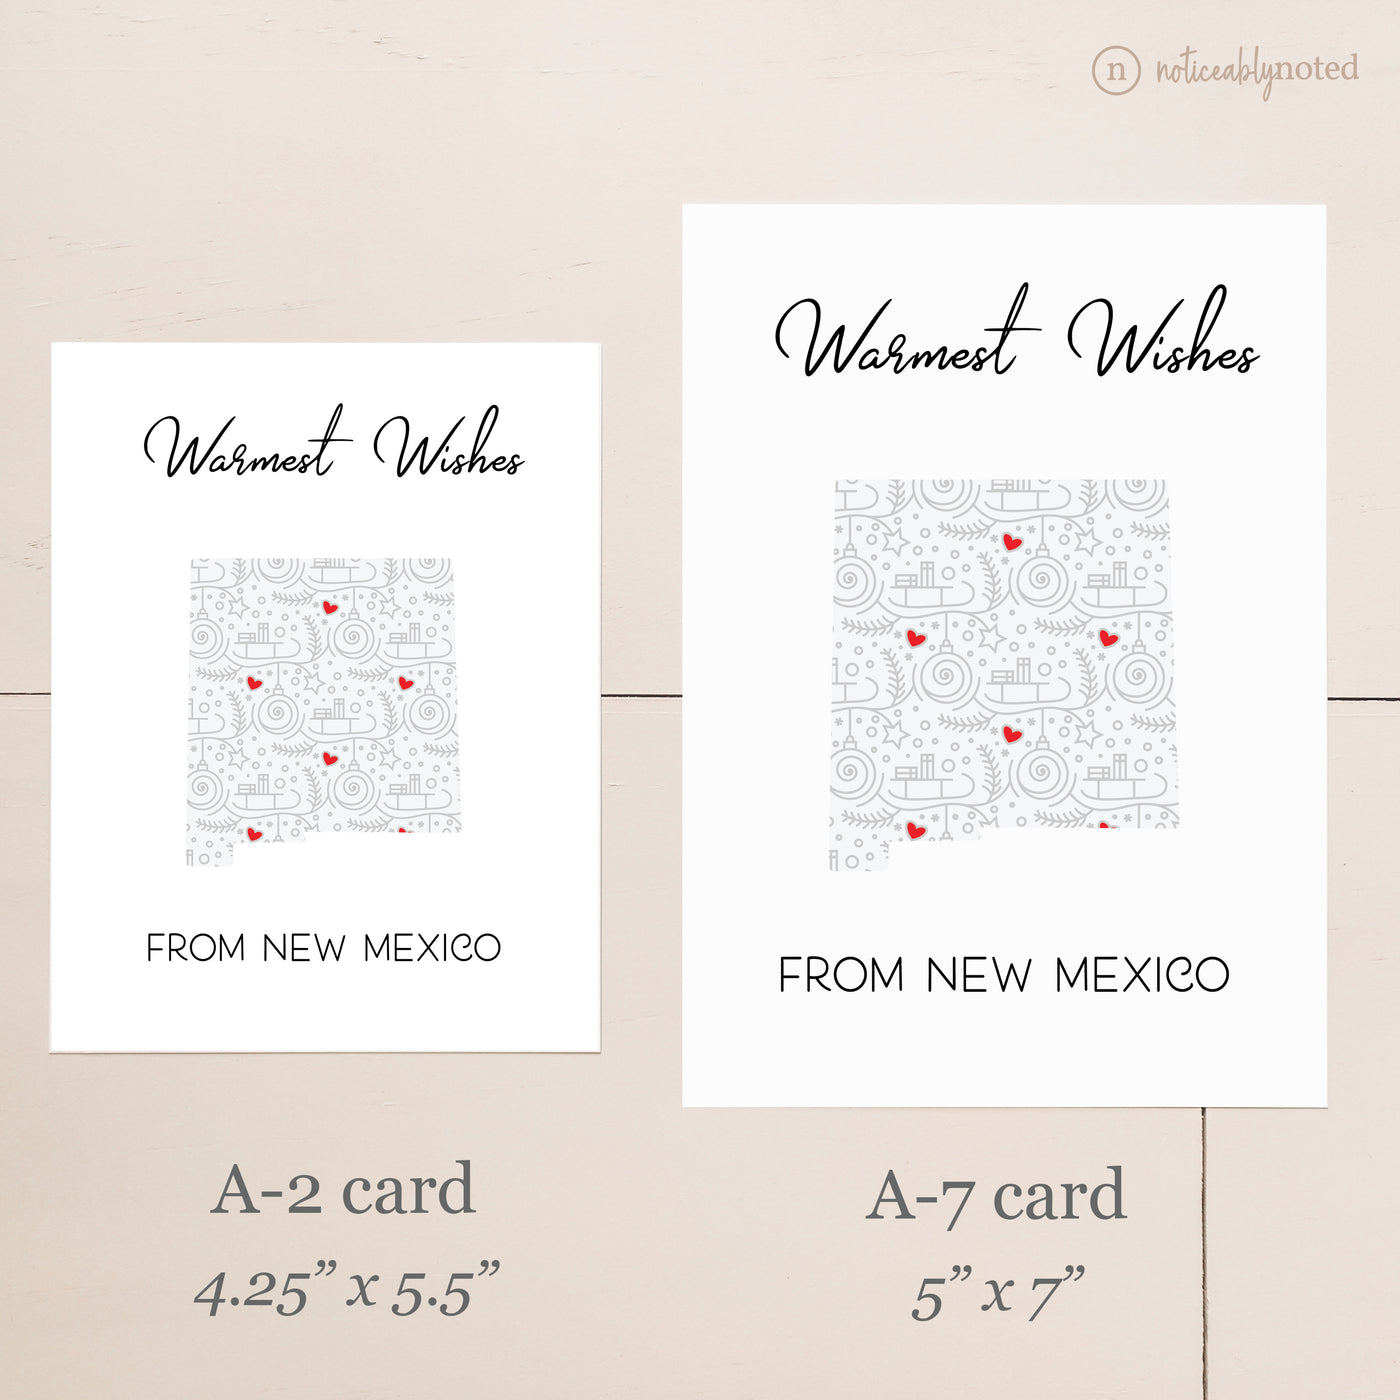 Card Size Comparison | Noticeably Noted